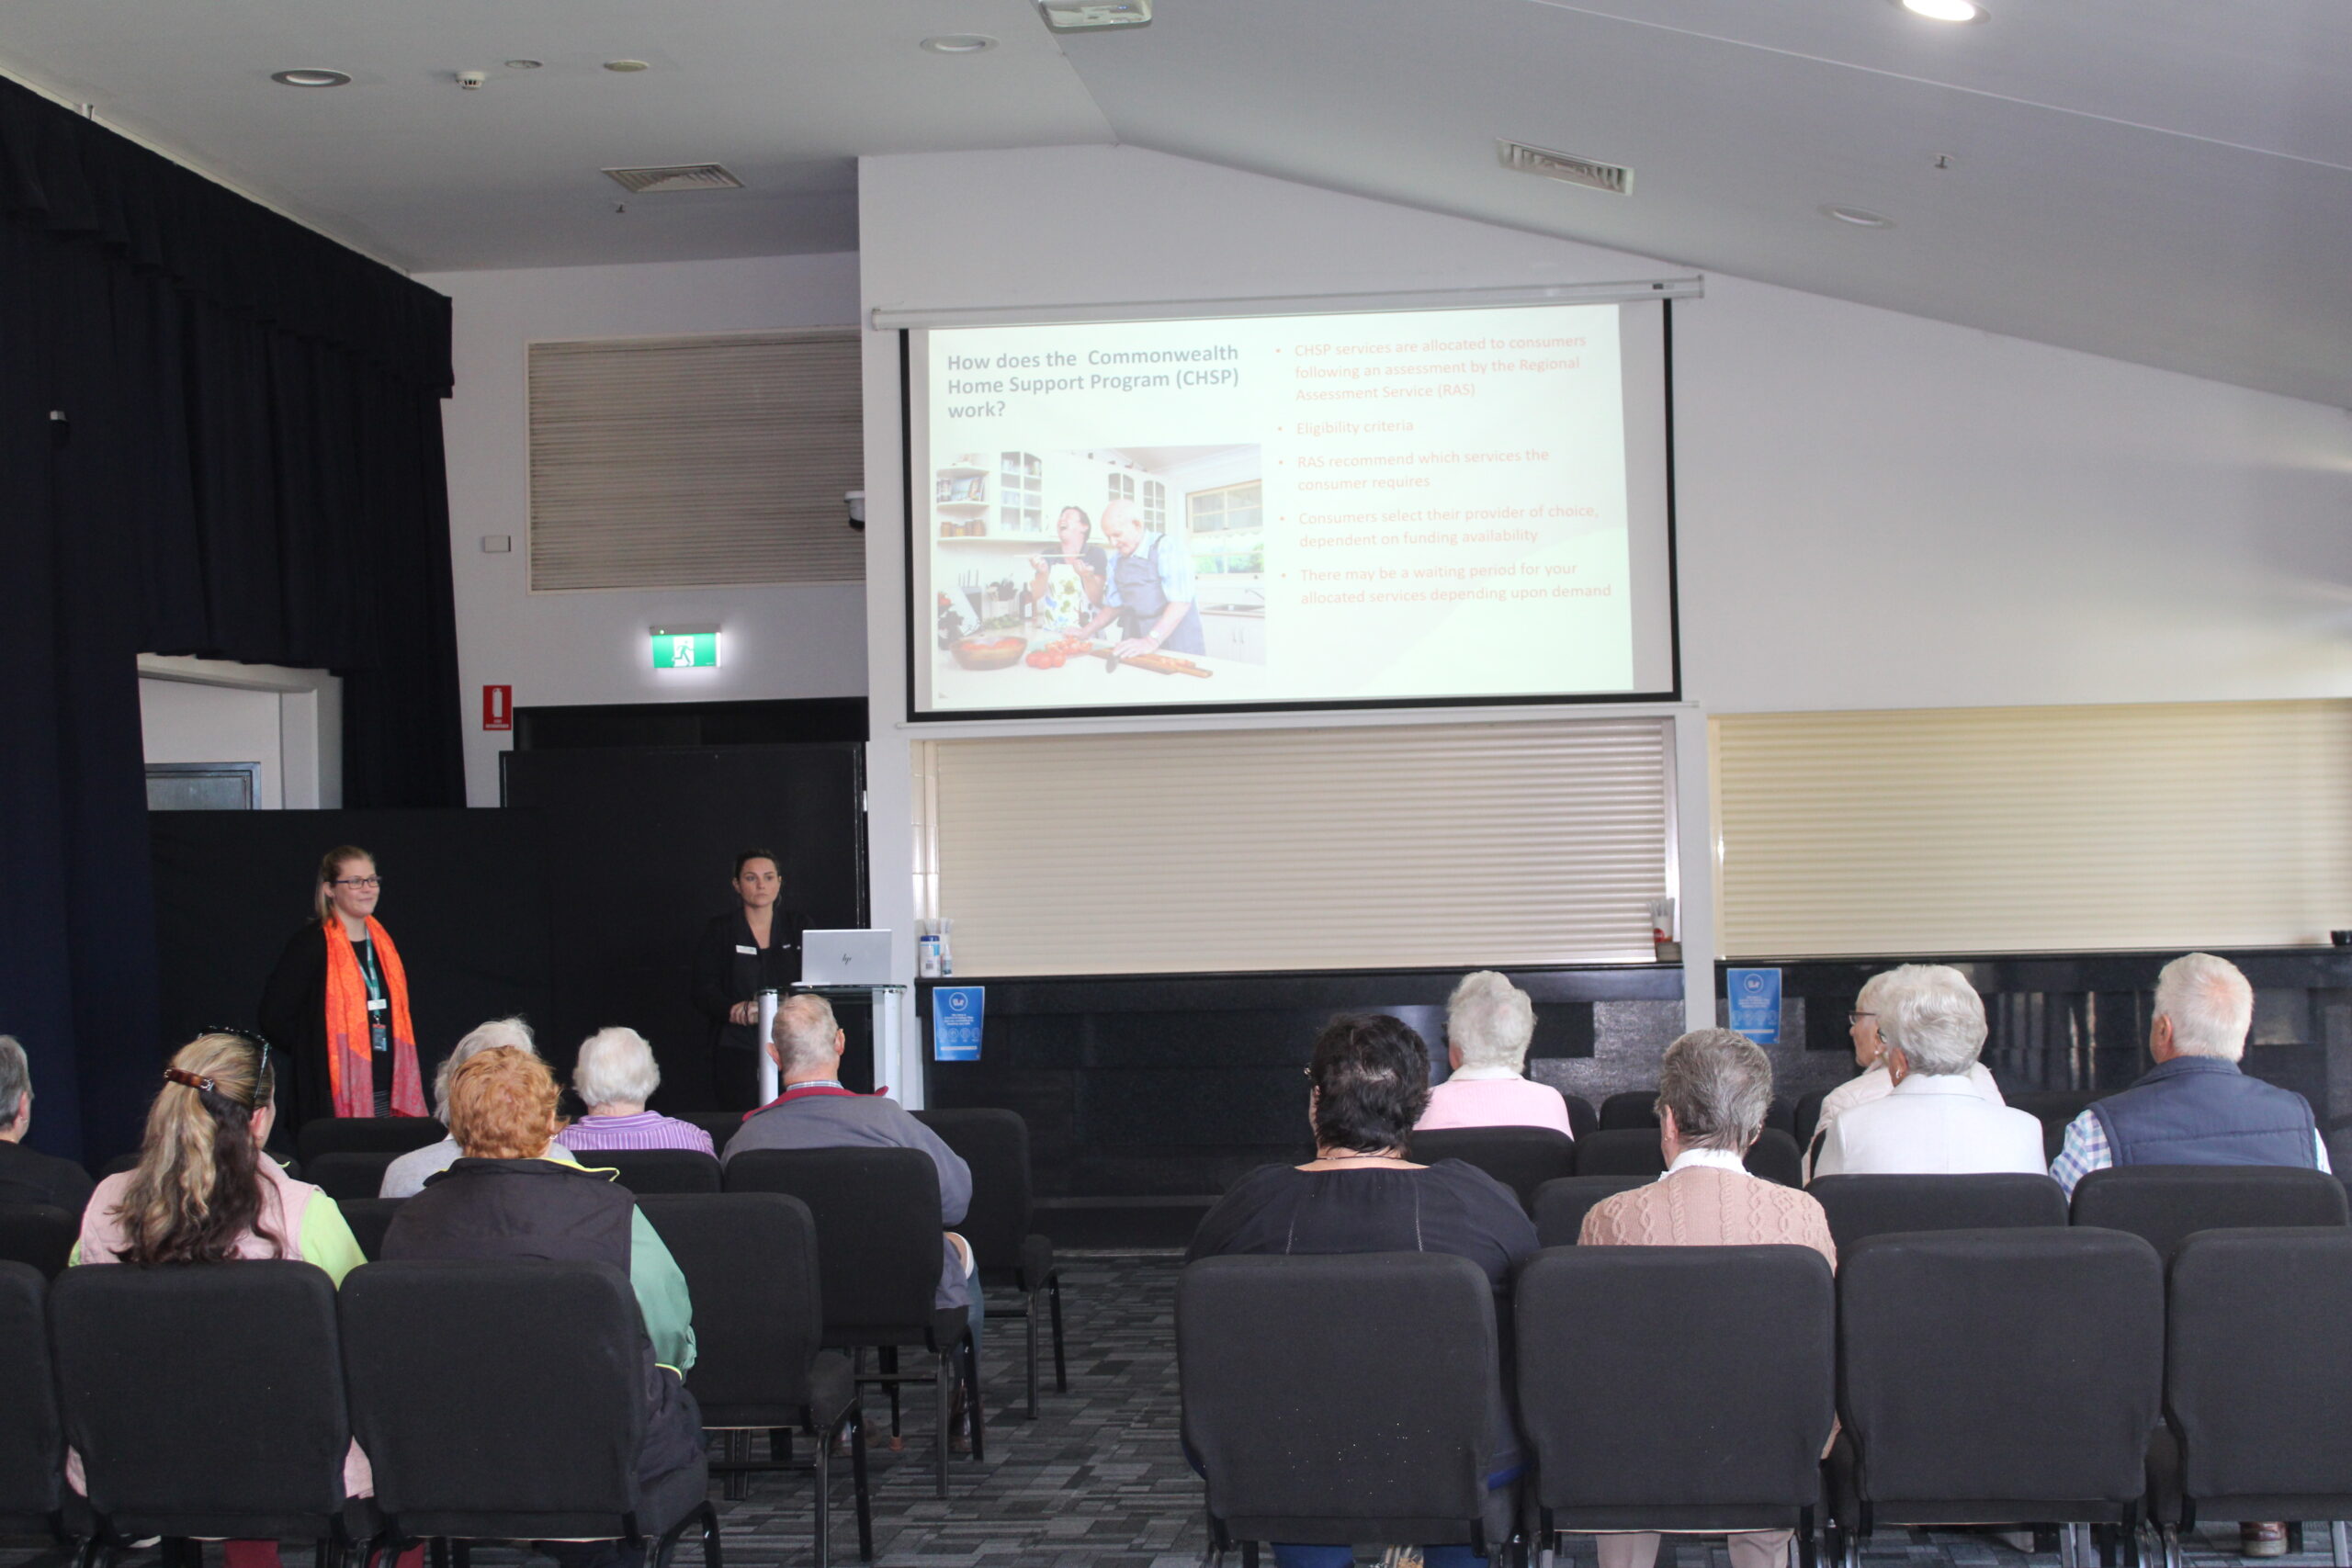 New England community north regional manager Anna Tait and coordinator Kassandra Mitchell address Whiddon Group’s ‘Understanding Home Care’ attendees at The Crossing Theatre, Narrabri.